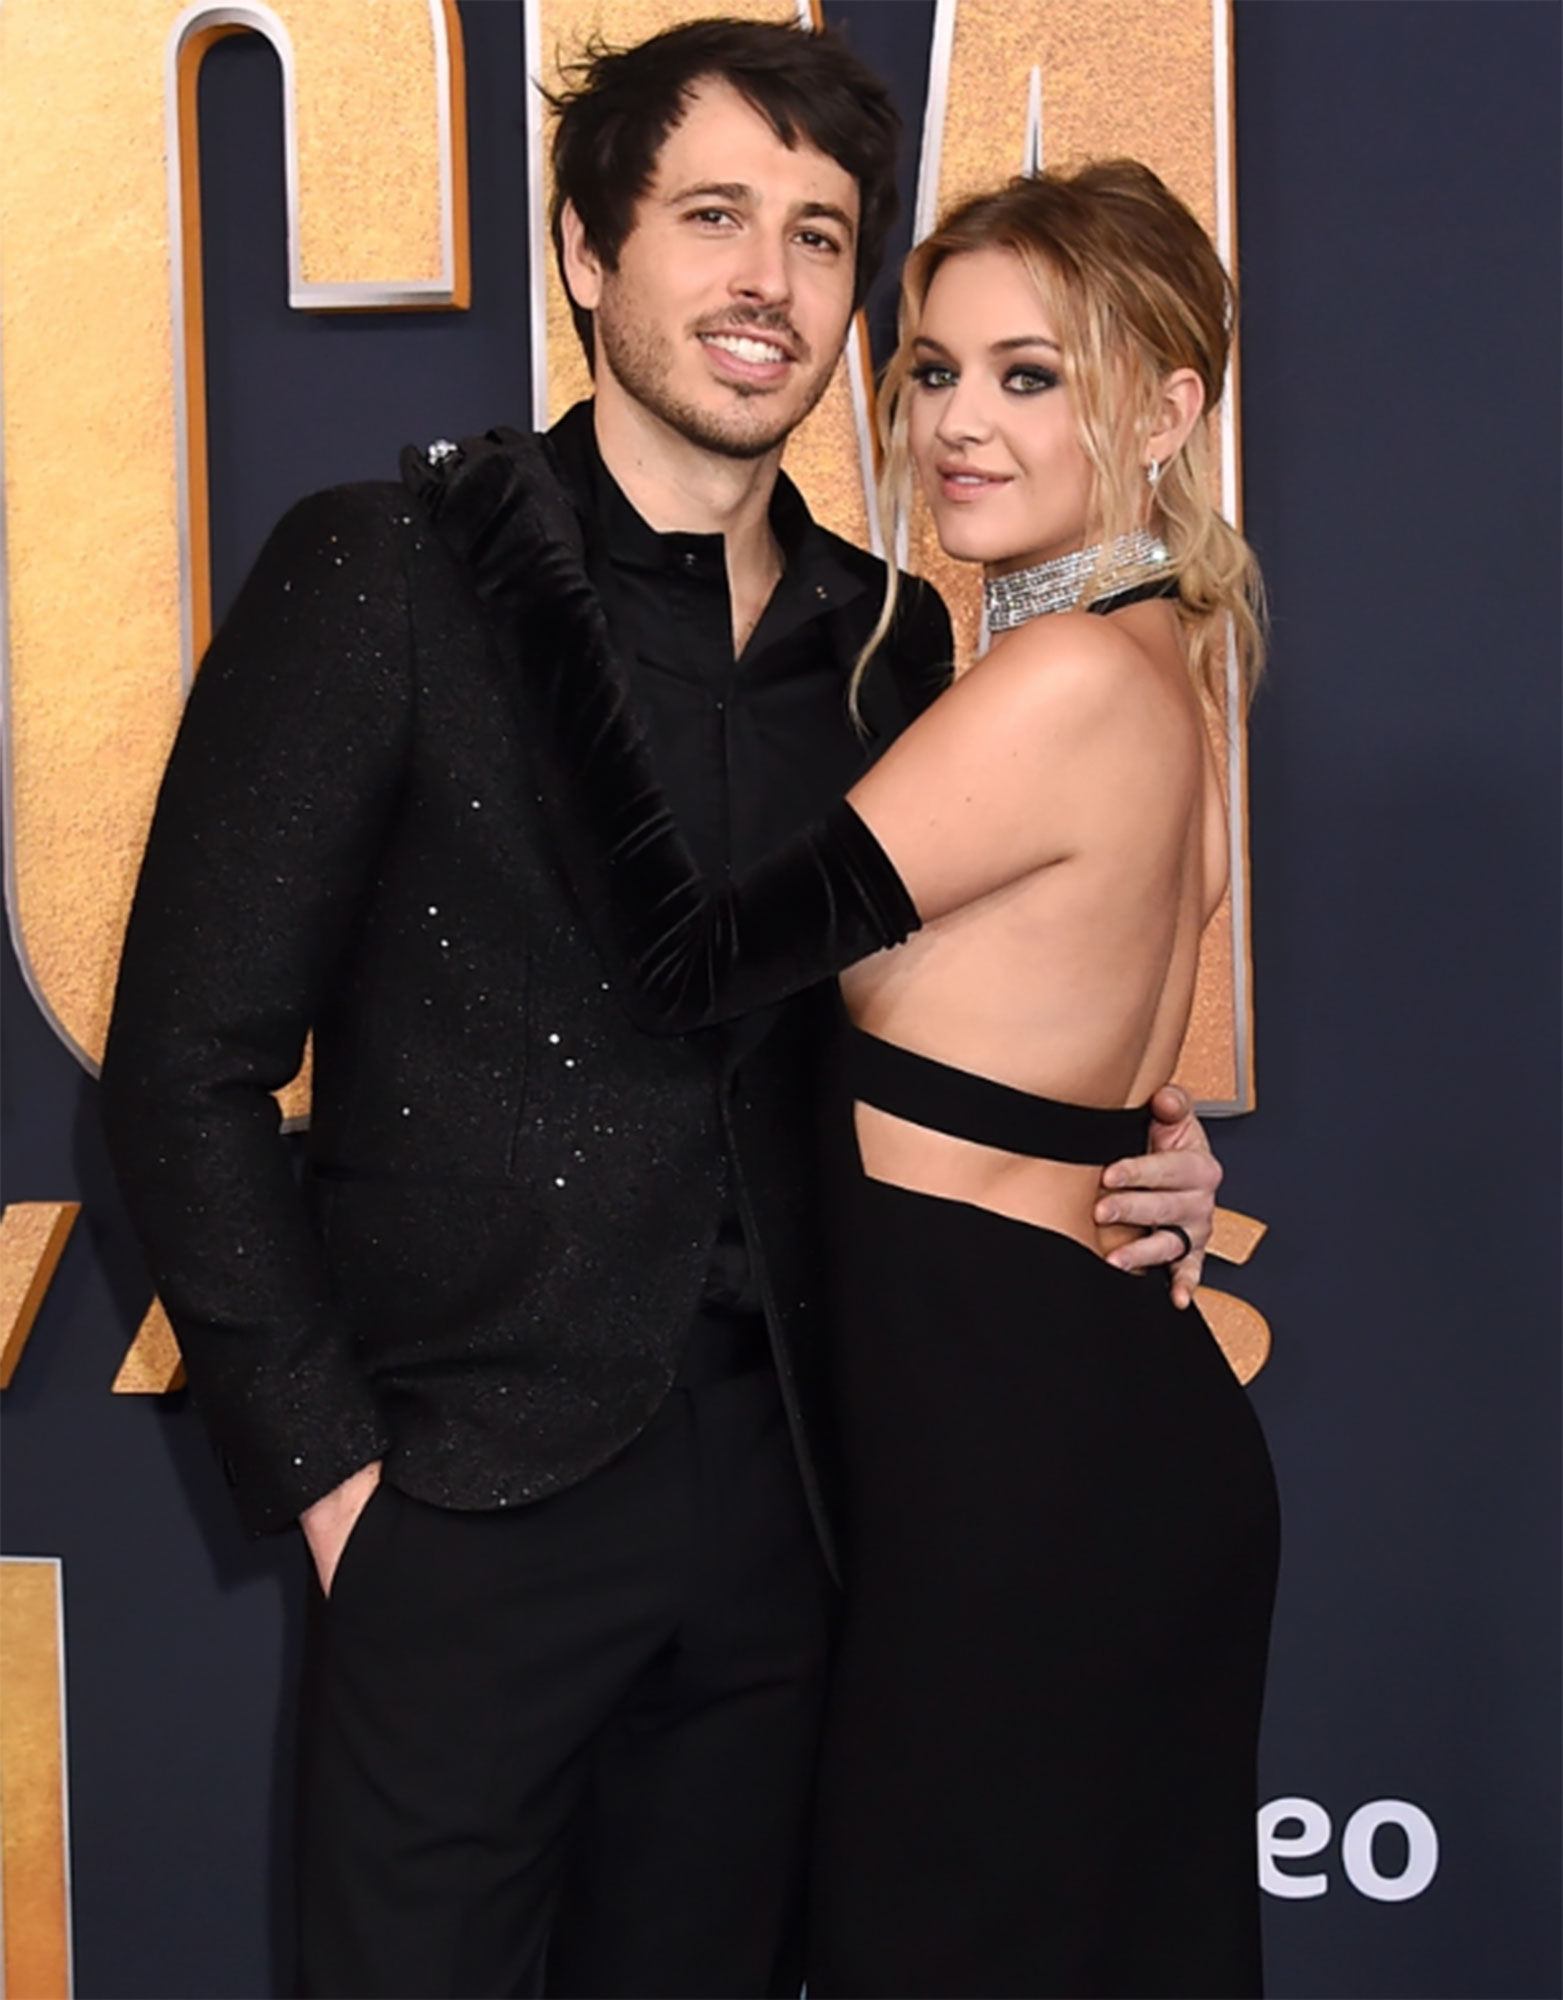 Kelsea Ballerini and Chase Stokes' Relationship Timeline Us Weekly